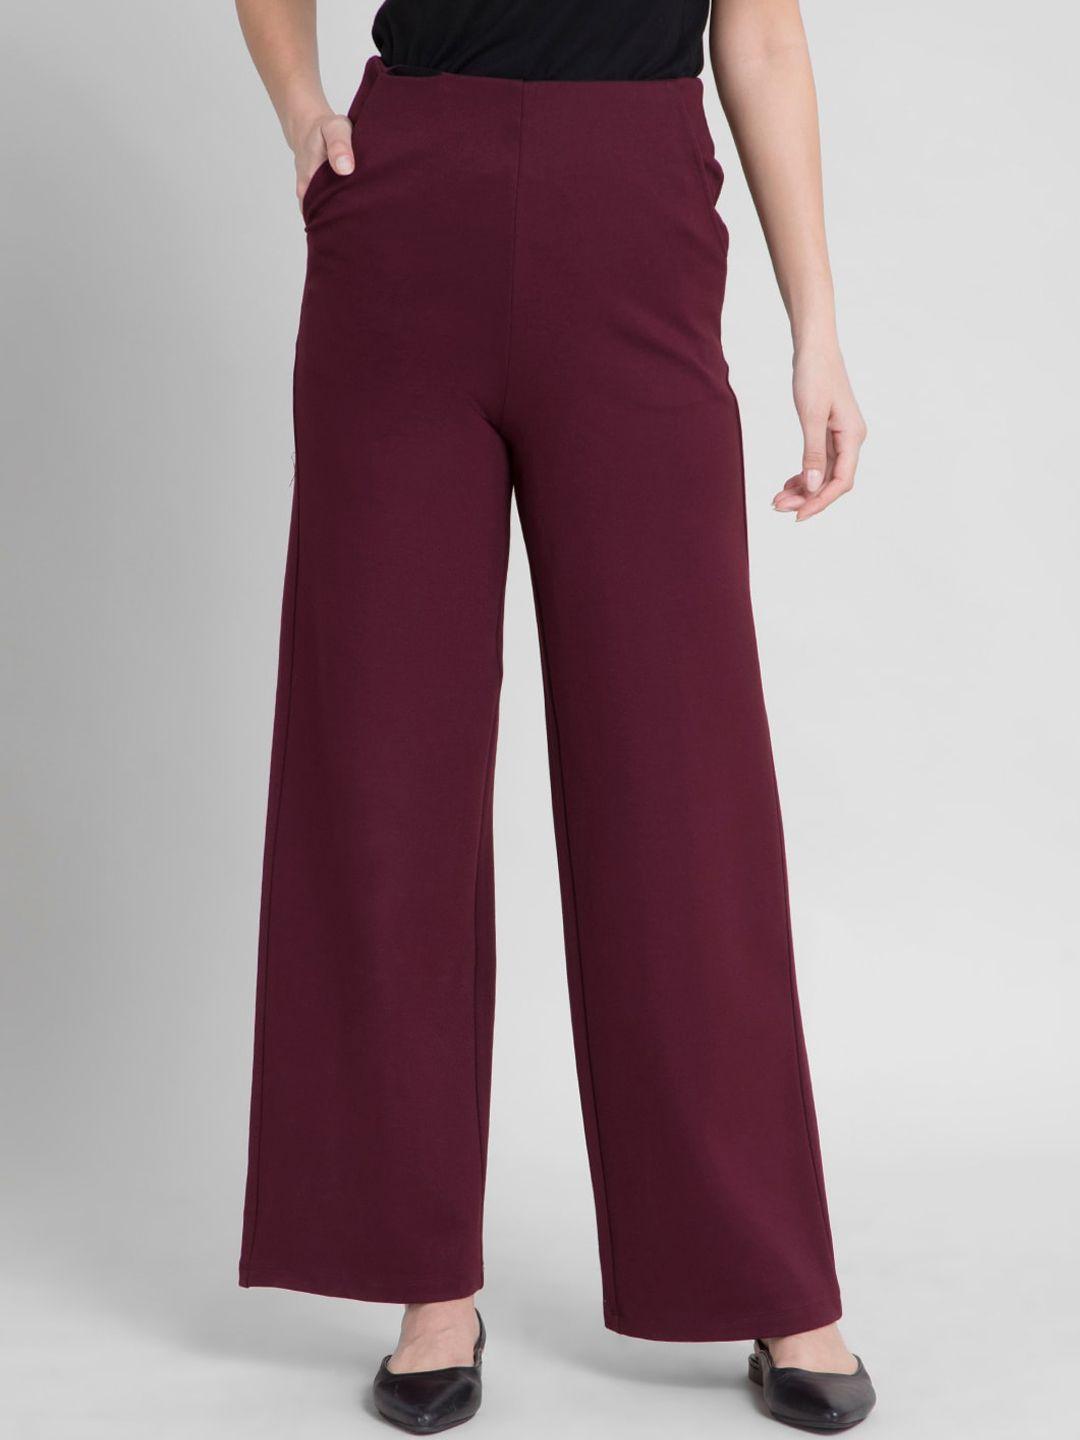 fablestreet women maroon flared high-rise livin culottes